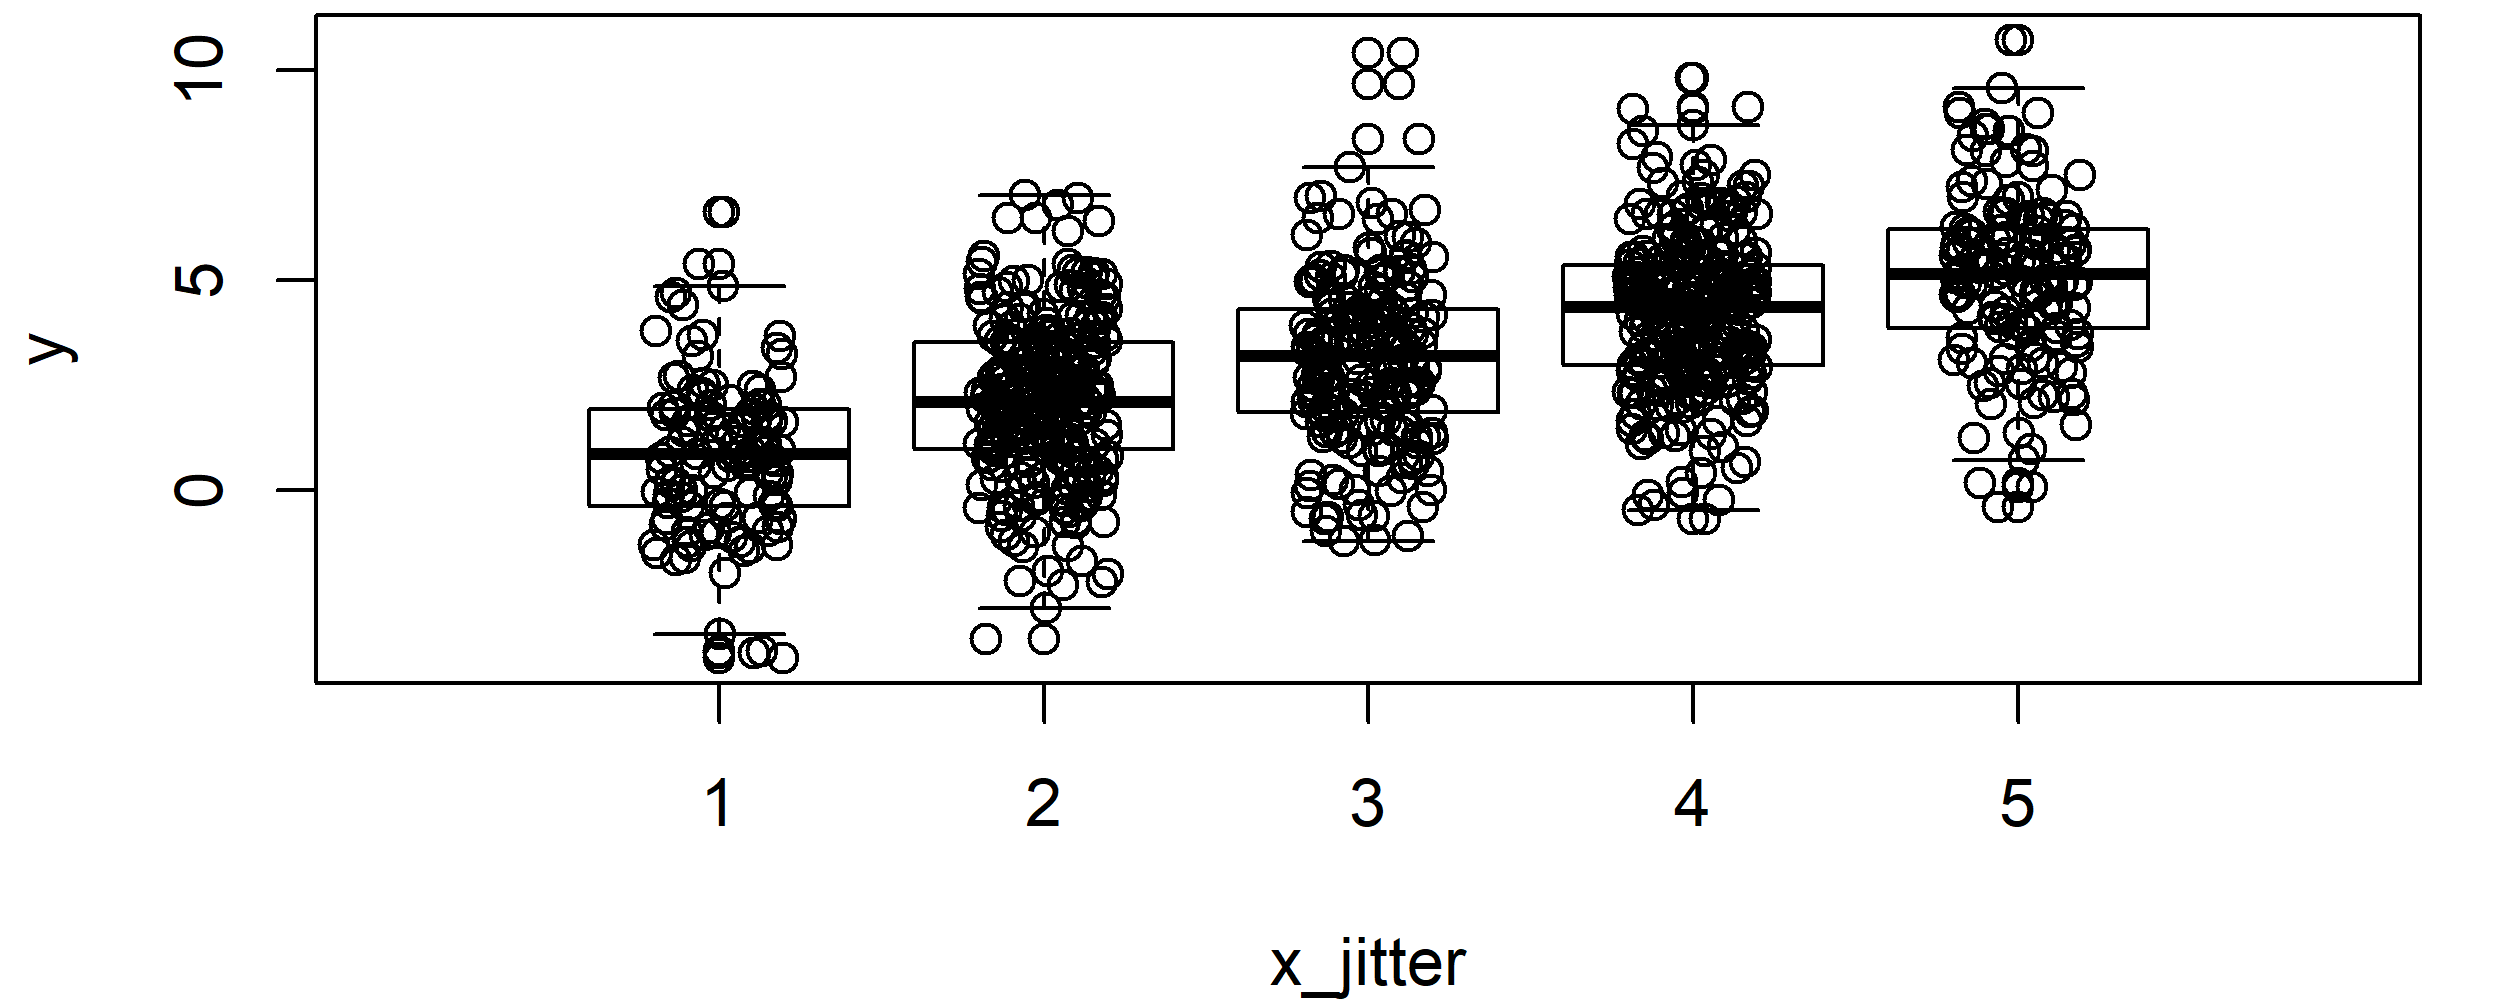 R Boxplot of Integer Variable with jitter R Function